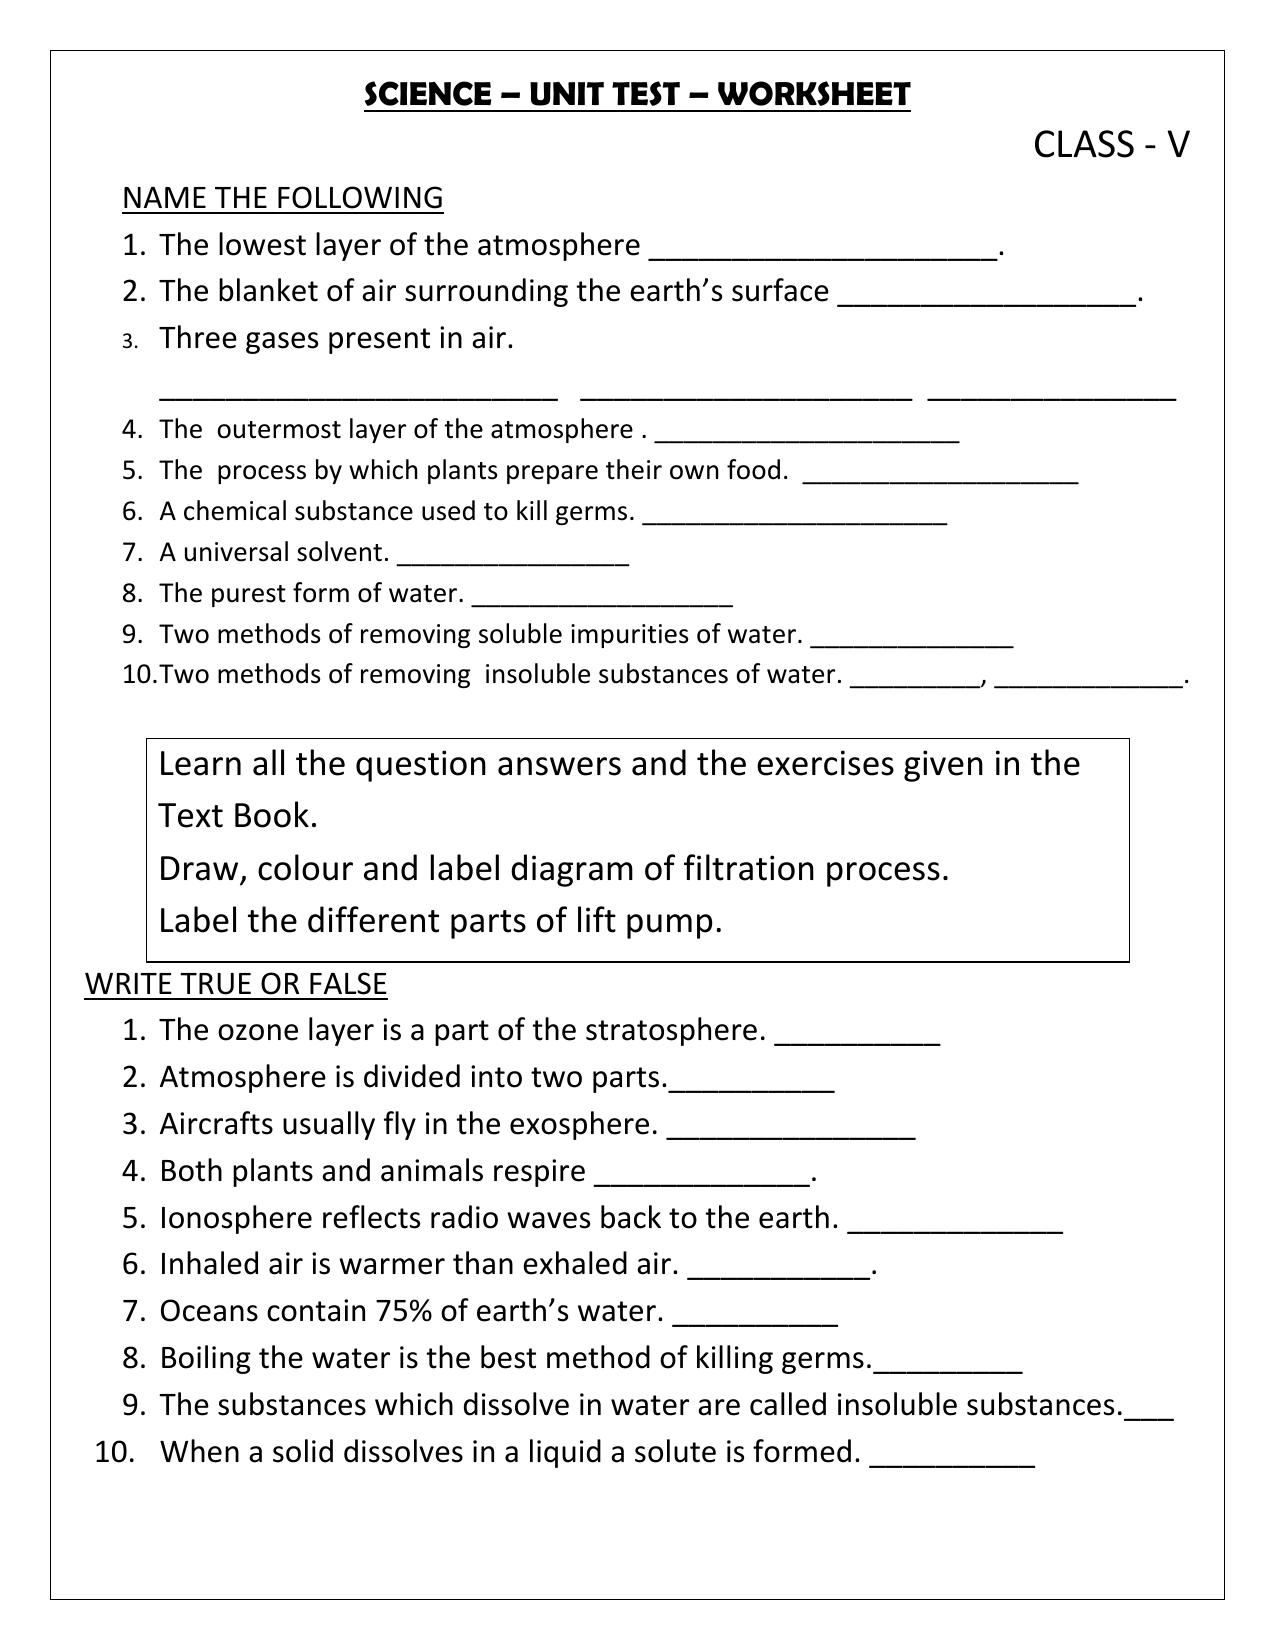 Worksheet for Class 5 Science Assignment 19 - Page 1